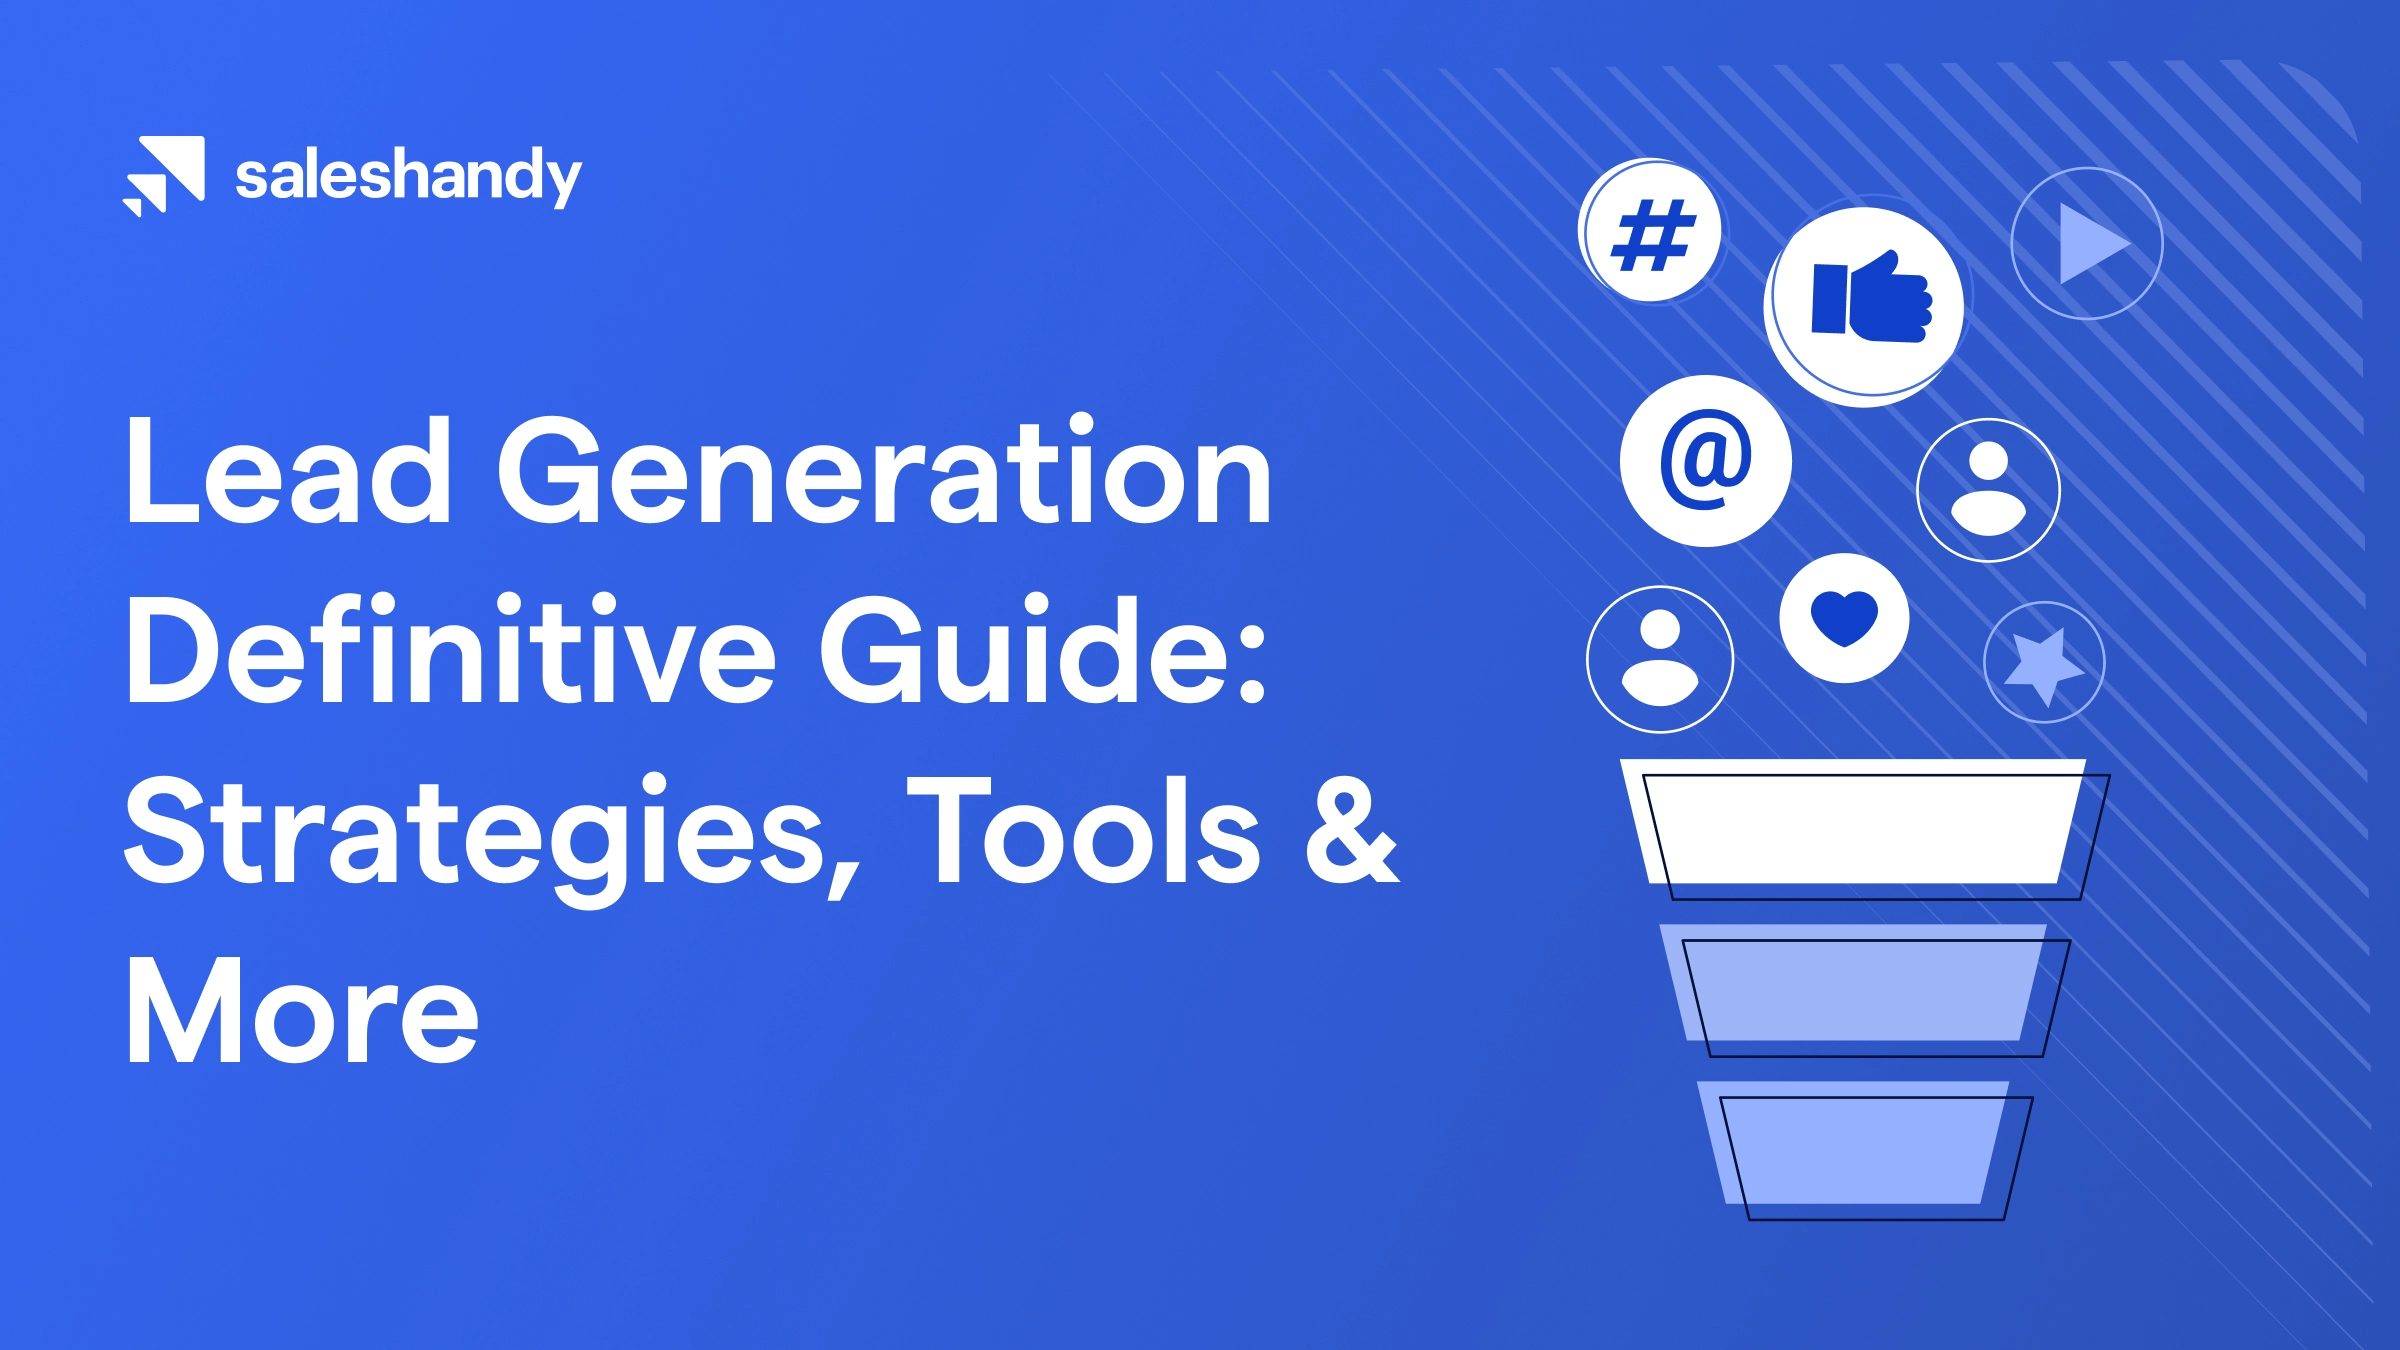 Lead Generation Definitive Guide Strategies, Tools & More